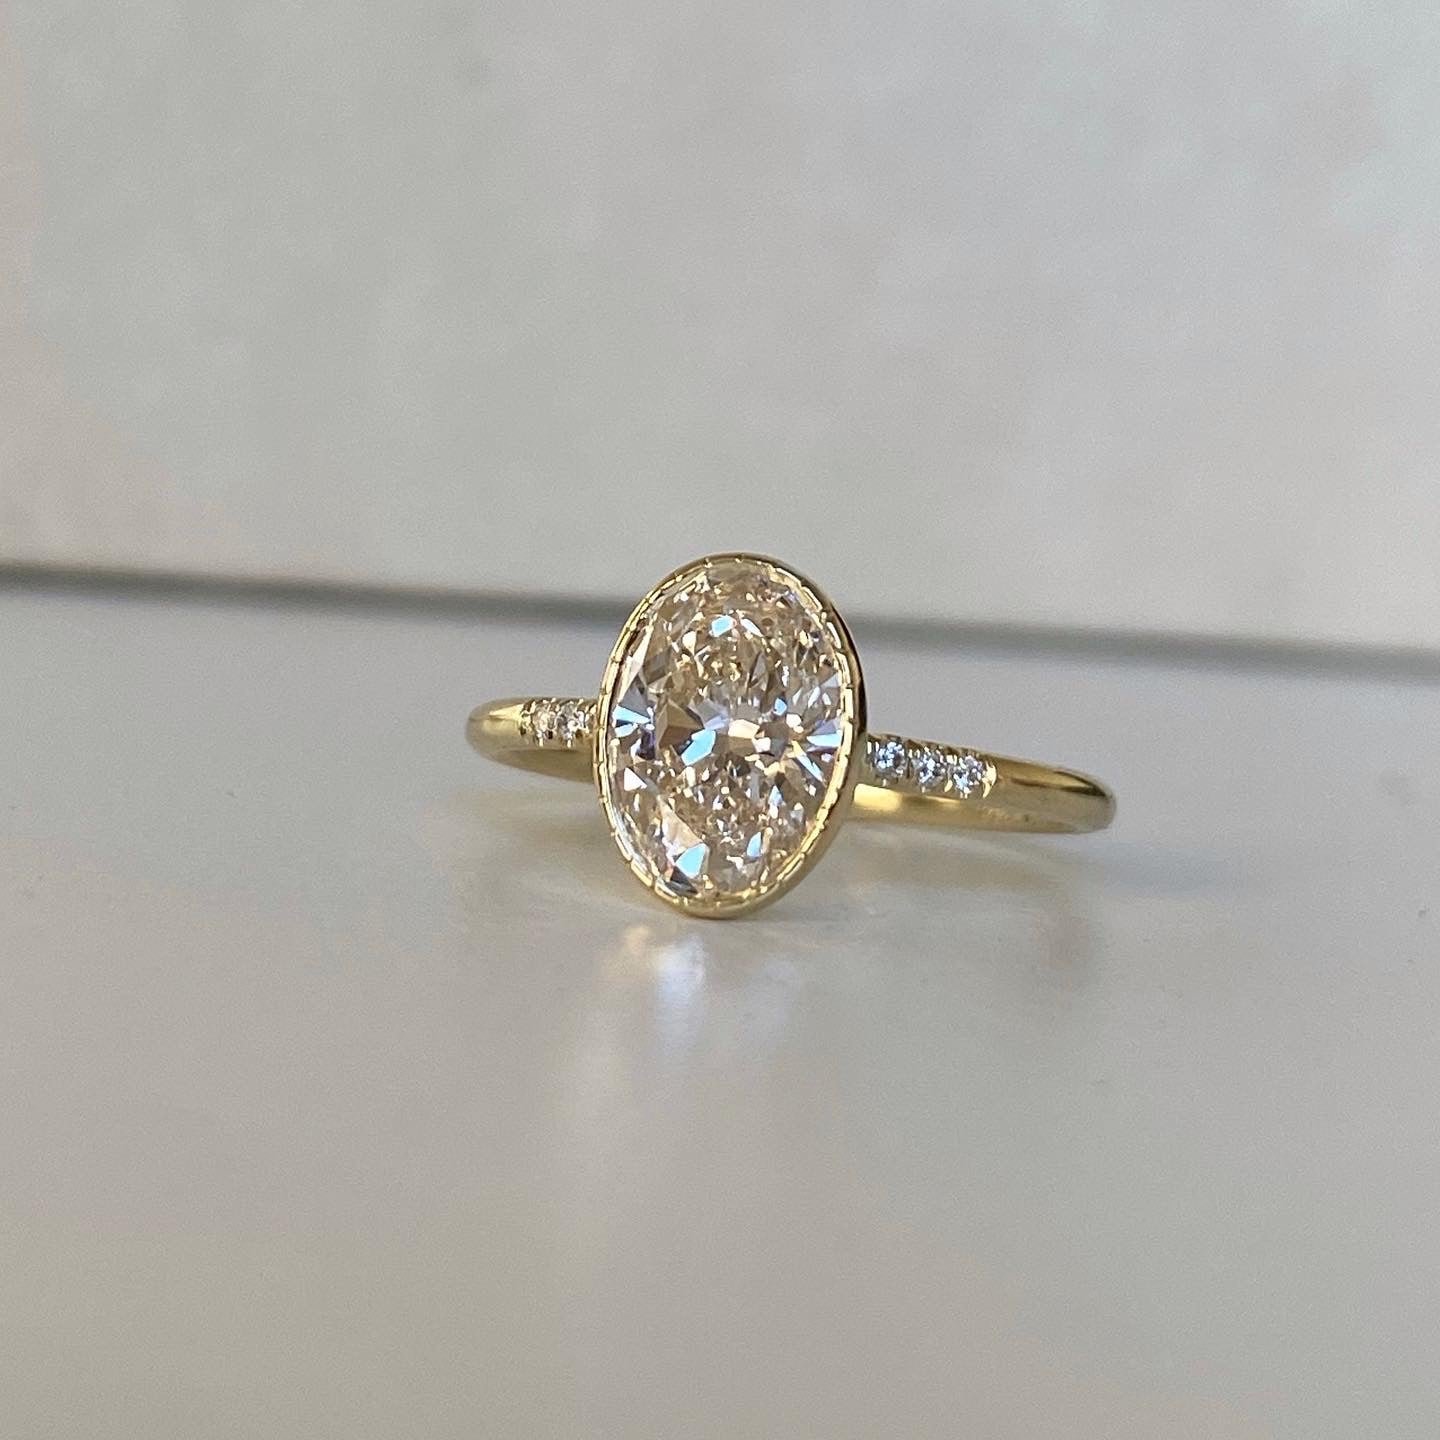 14k yellow gold custom engagement ring with oval cut white diamond center stone with pave white diamond equilibrium style stones